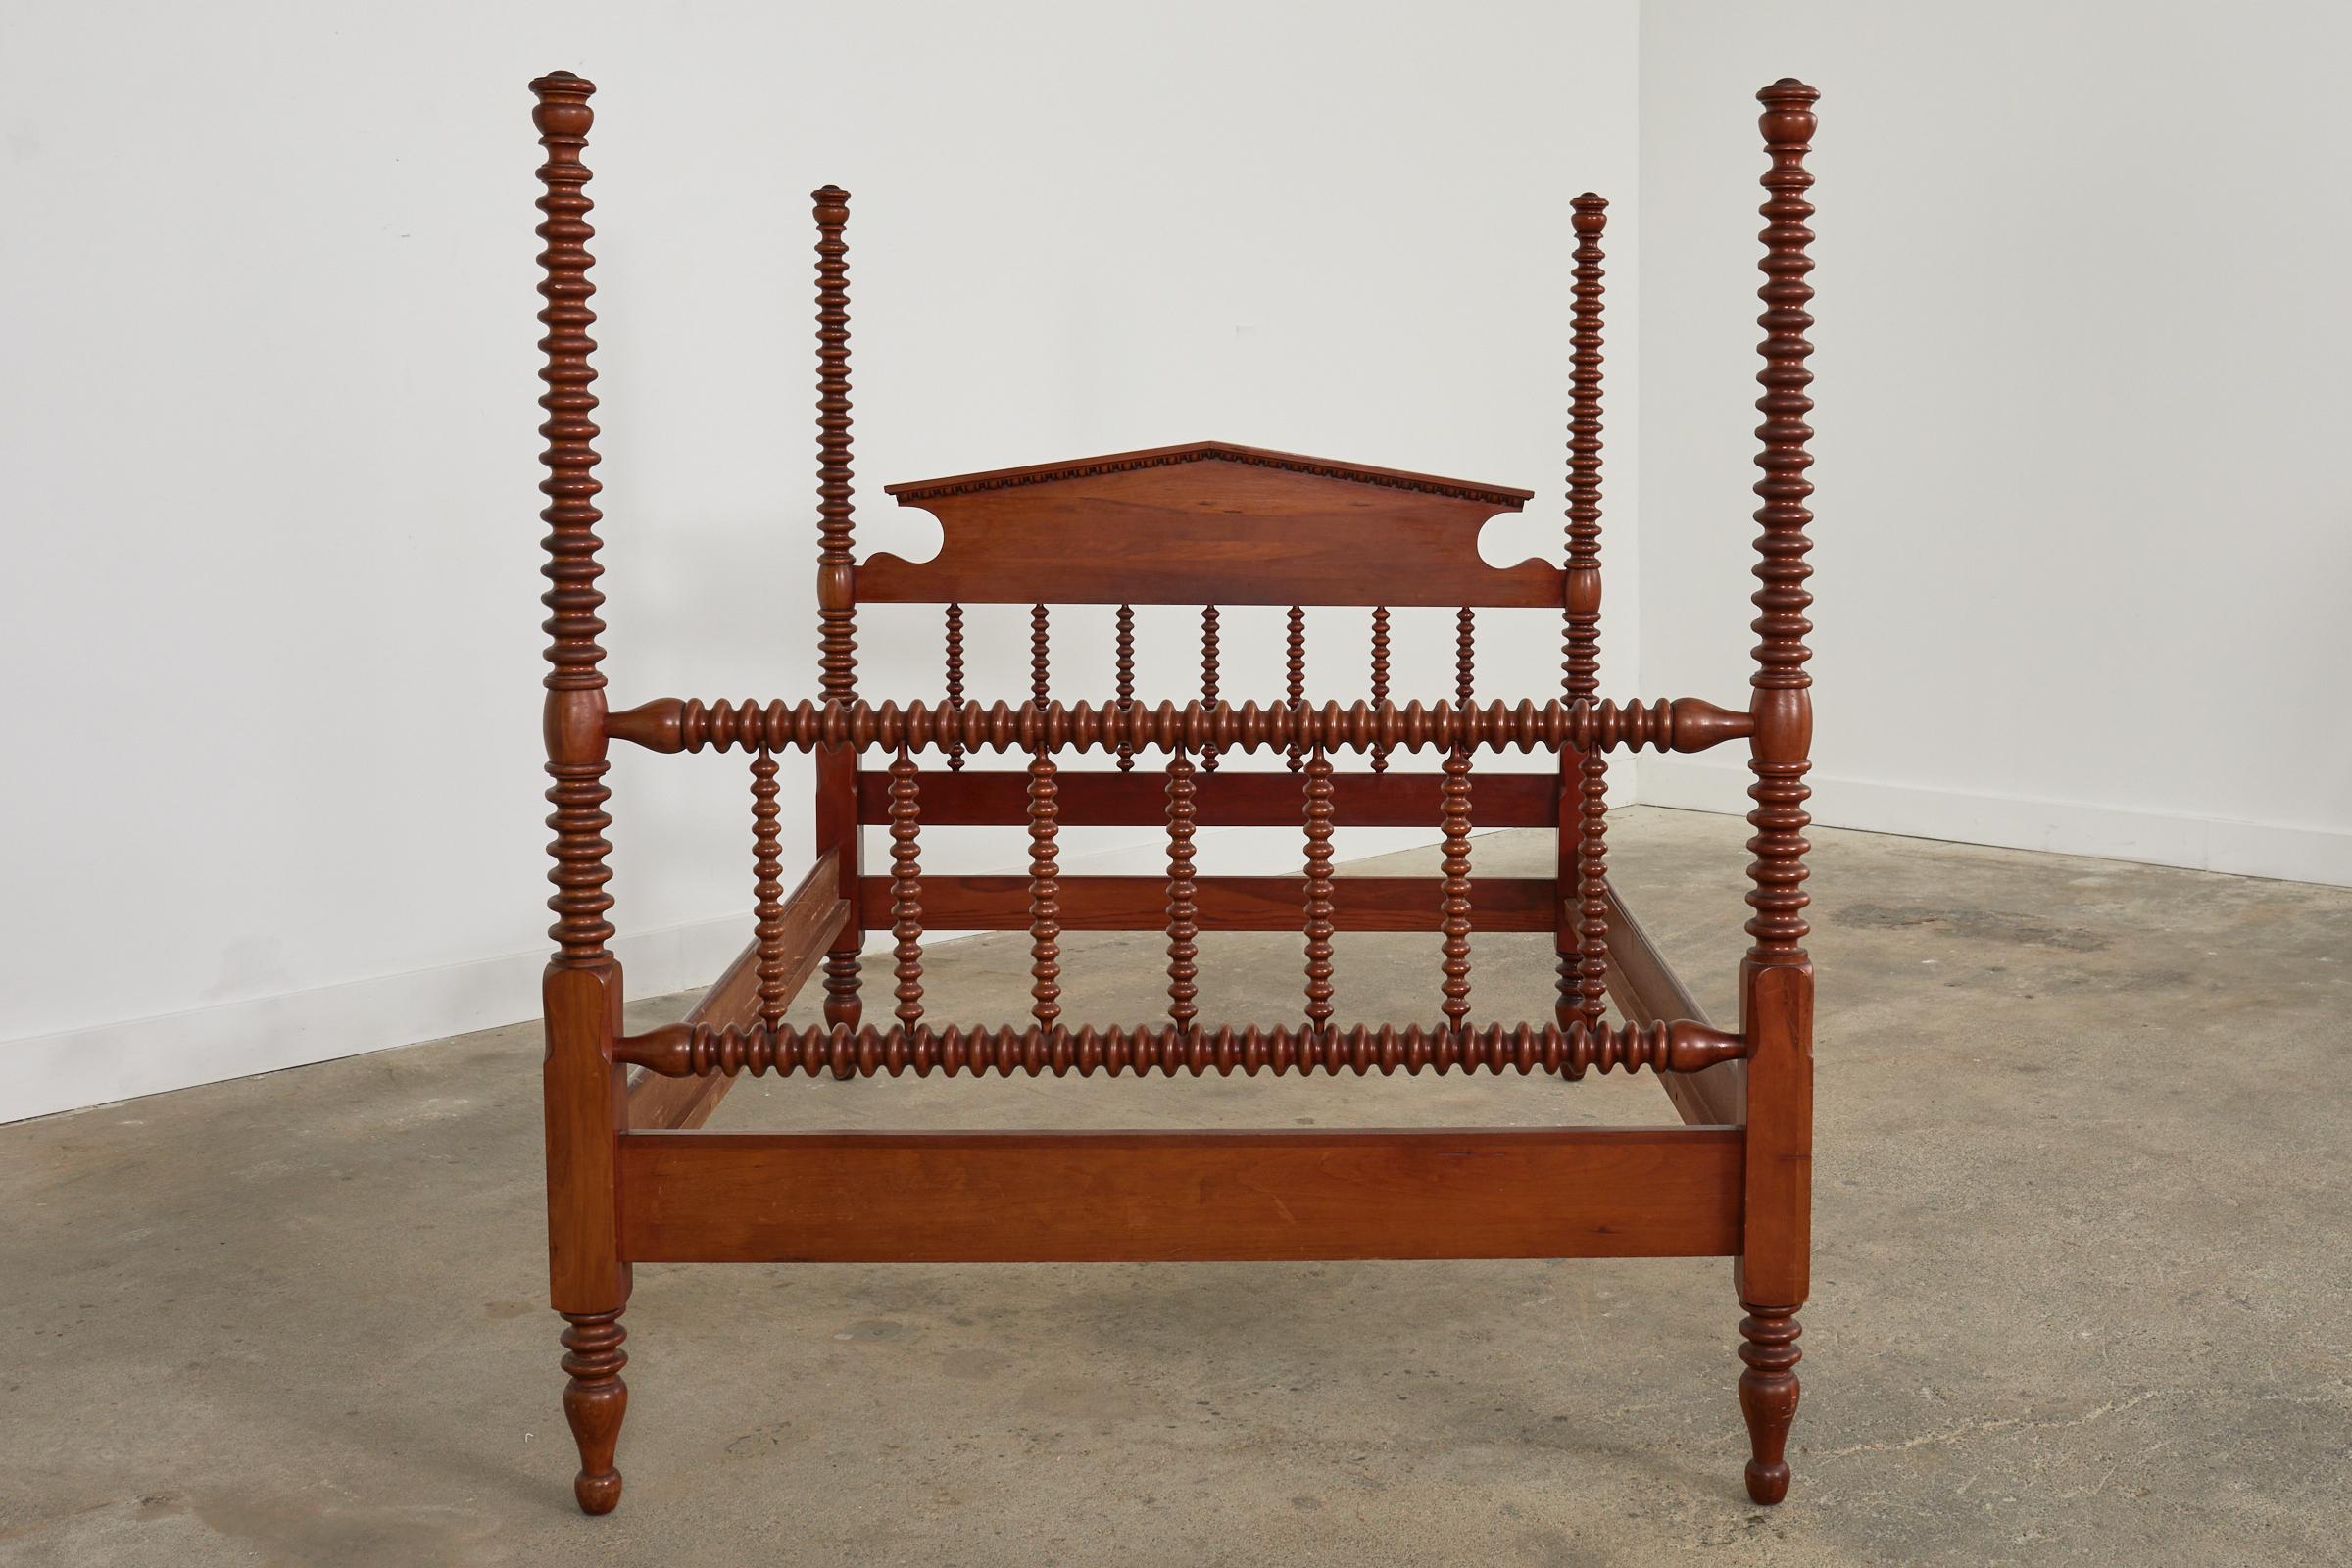 Impressive American classical spindle bed crafted from fruitwood. The bed features exaggerated tall bobbin or spool turned bed posts that give the bed a dramatic profile. The set includes a headboard, footboard, and two rails. The headboard has an